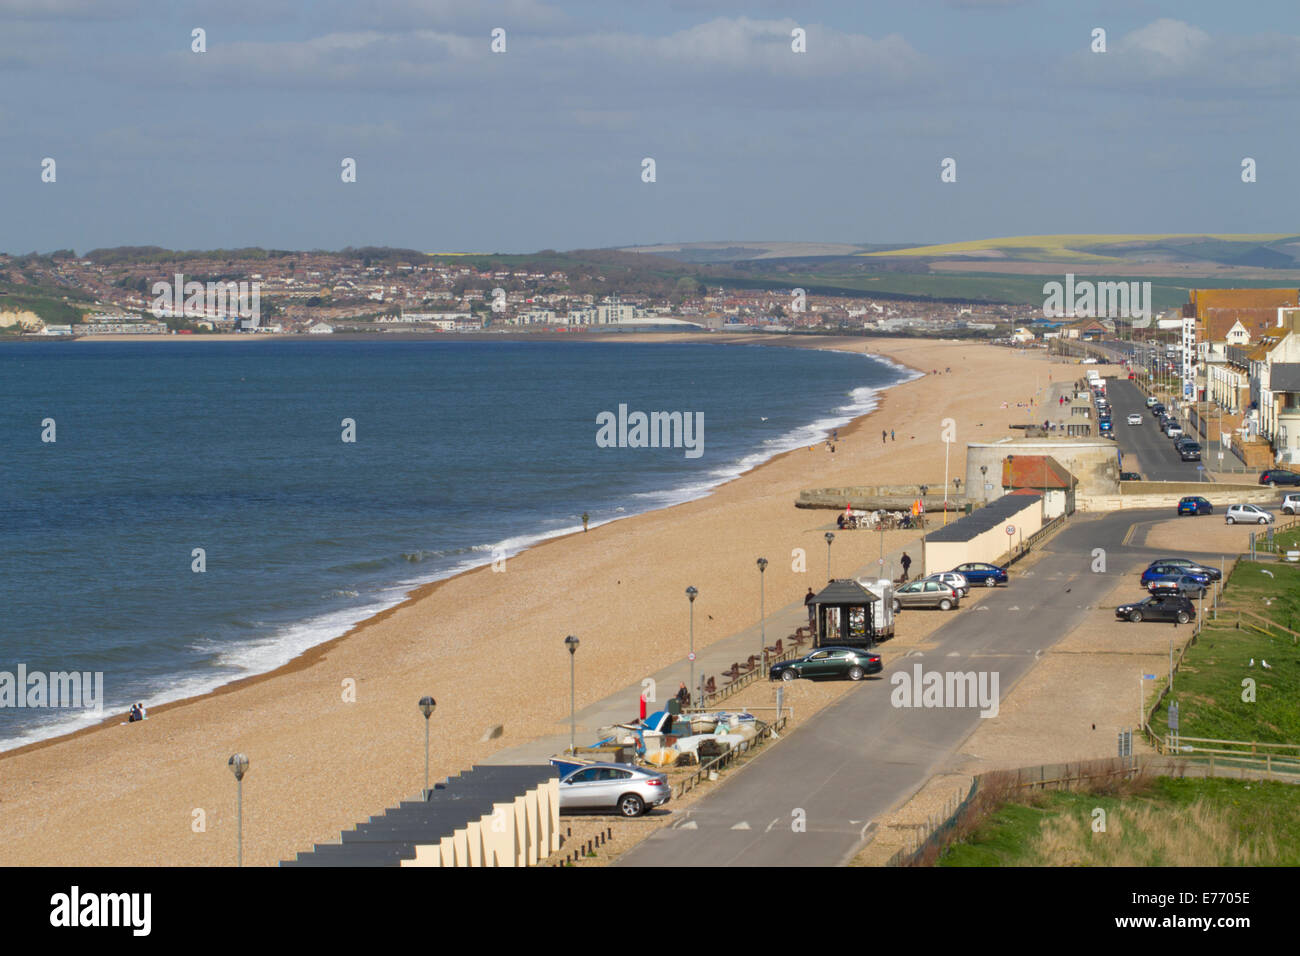 Seaford promenade on the Sussex coast, looking towards Newhaven. East Sussex, England. April. Stock Photo